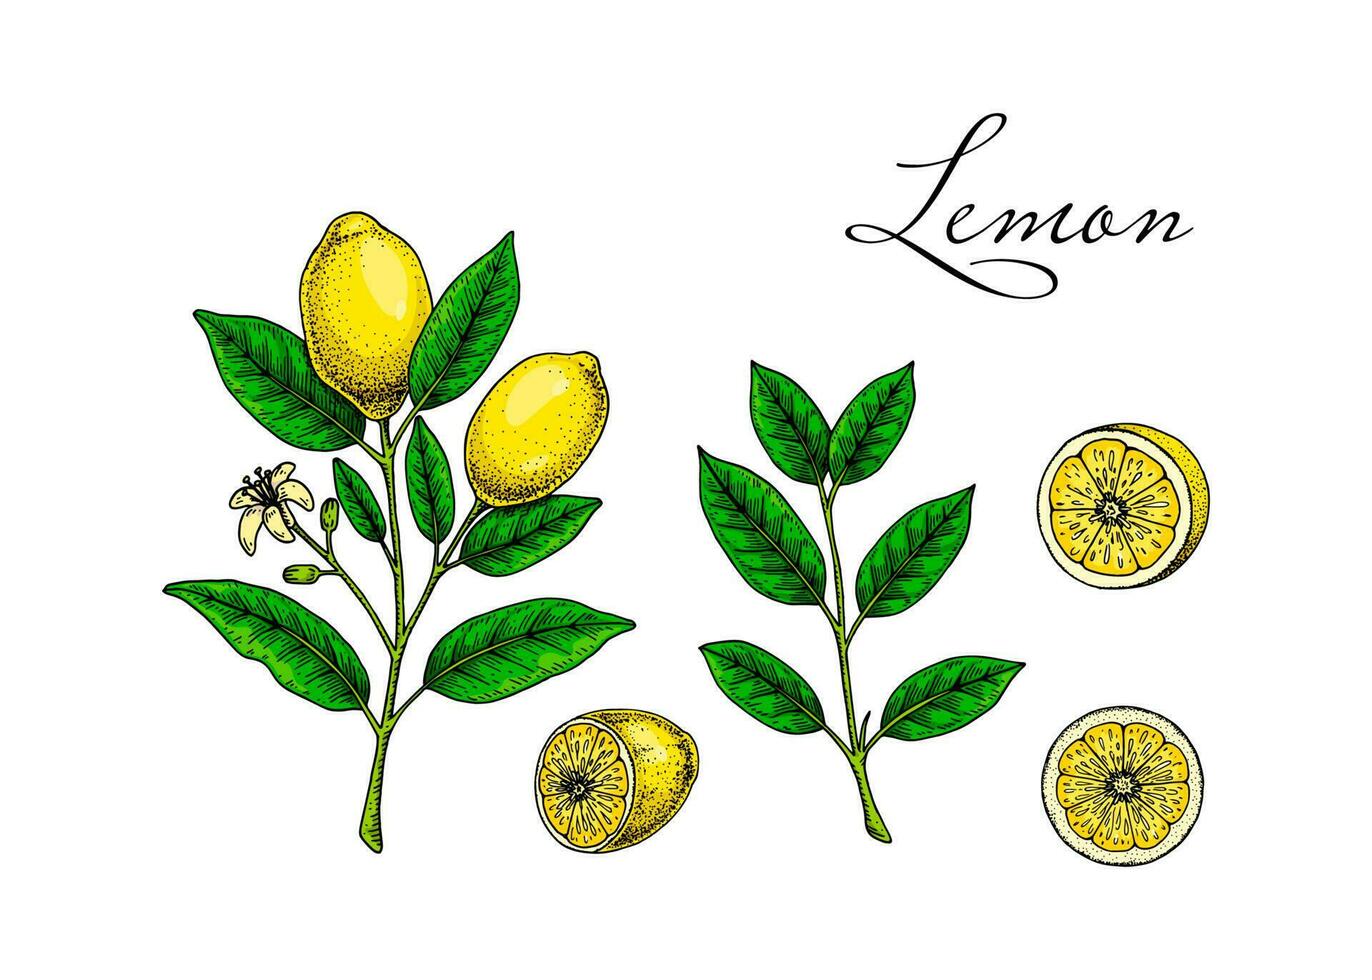 Lemon fruit, branches, leaves and slices. Colorful hand drawn vector illustration in sketch style. Tropical exotic citrus fruit summer design elements